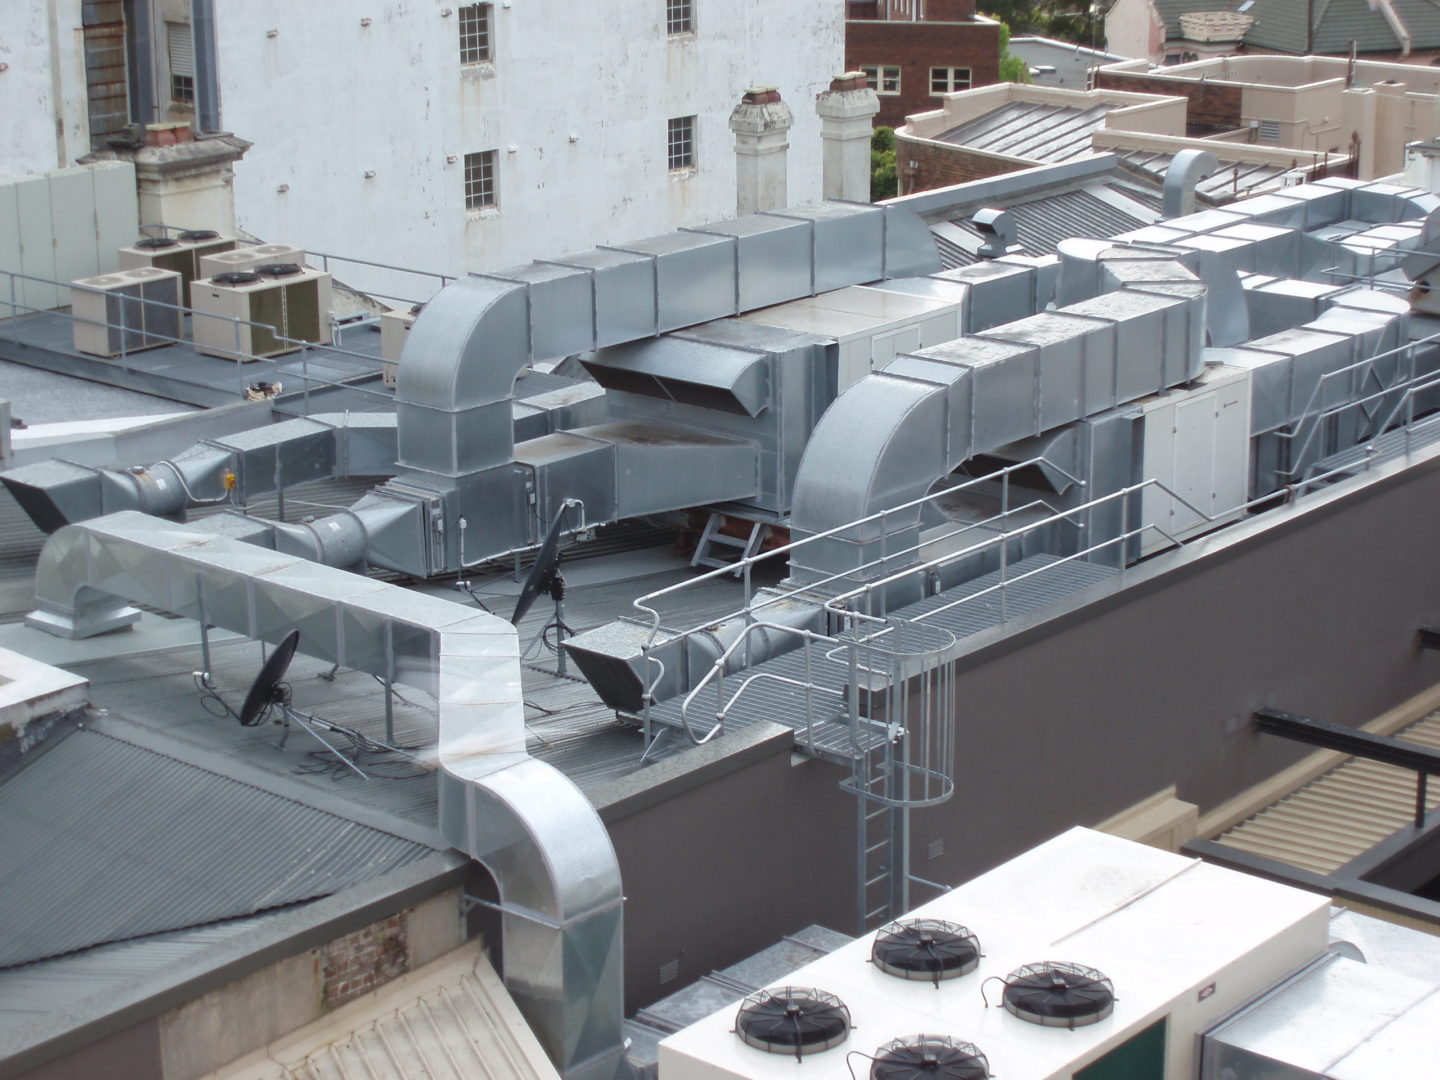 complex interconnecton air ducting on a roof top